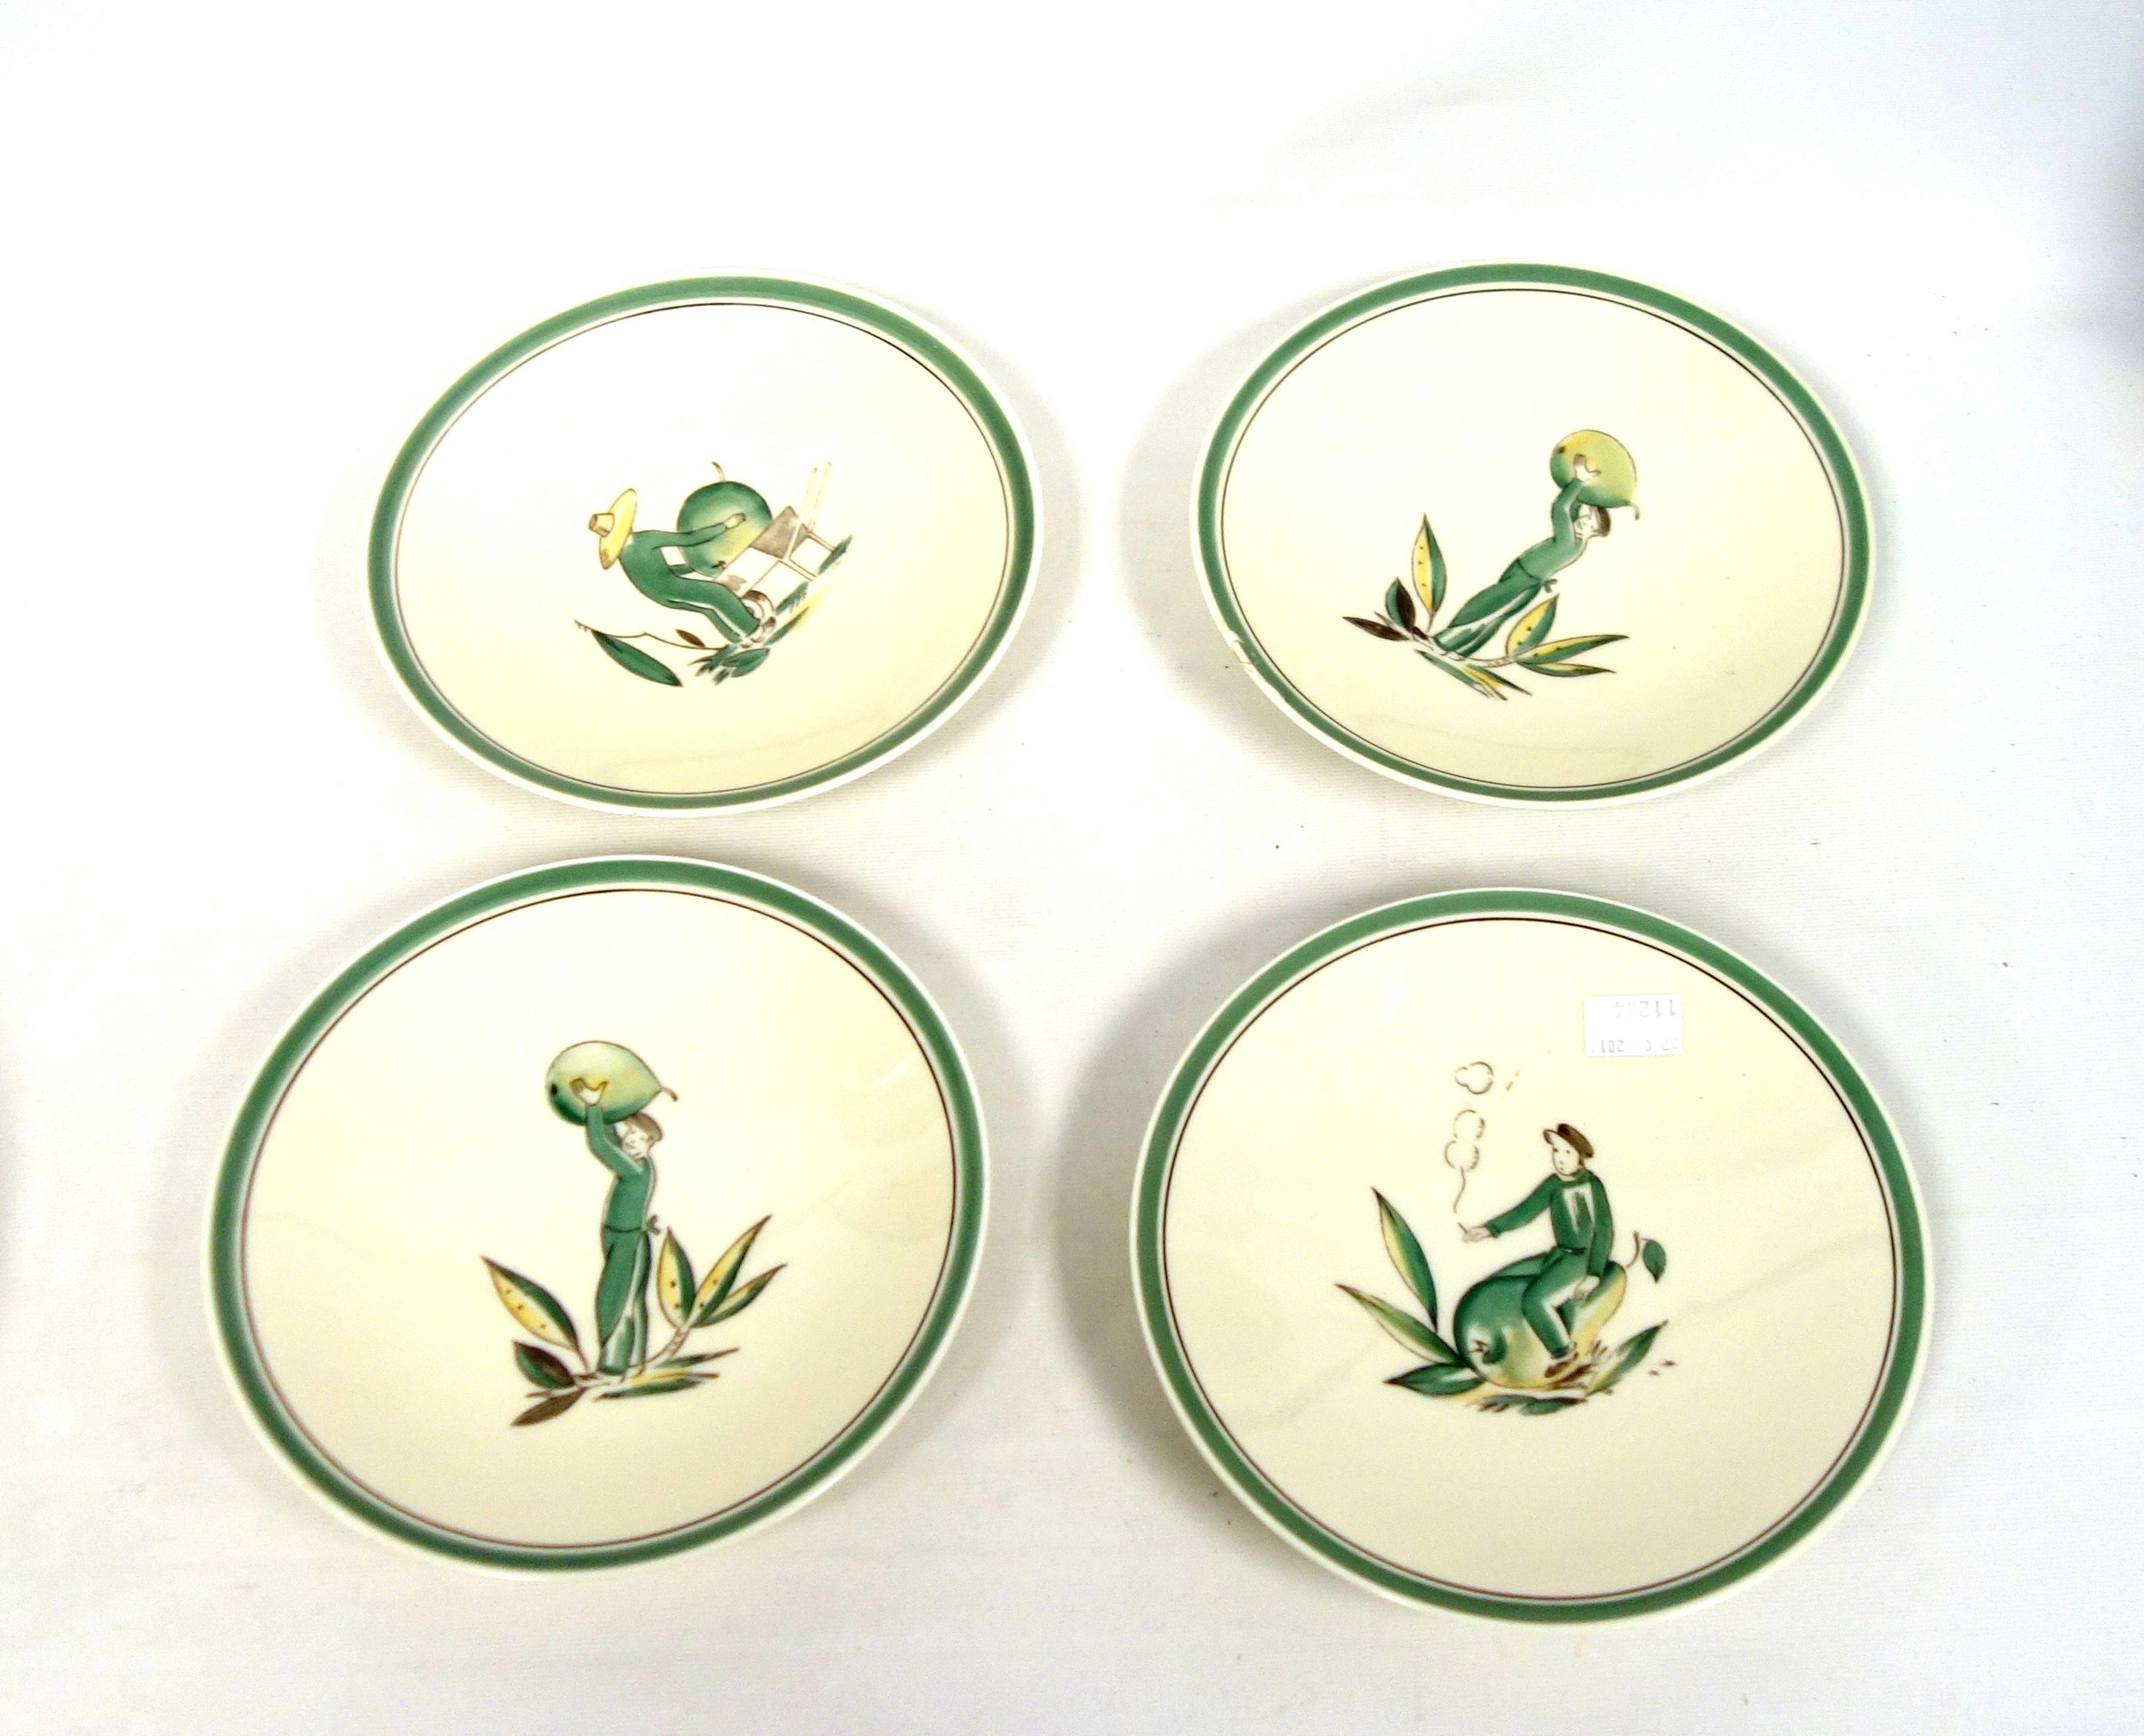 Royal Copenhagen part dessert service decorated with figures carrying fruit within a green border, - Image 2 of 6